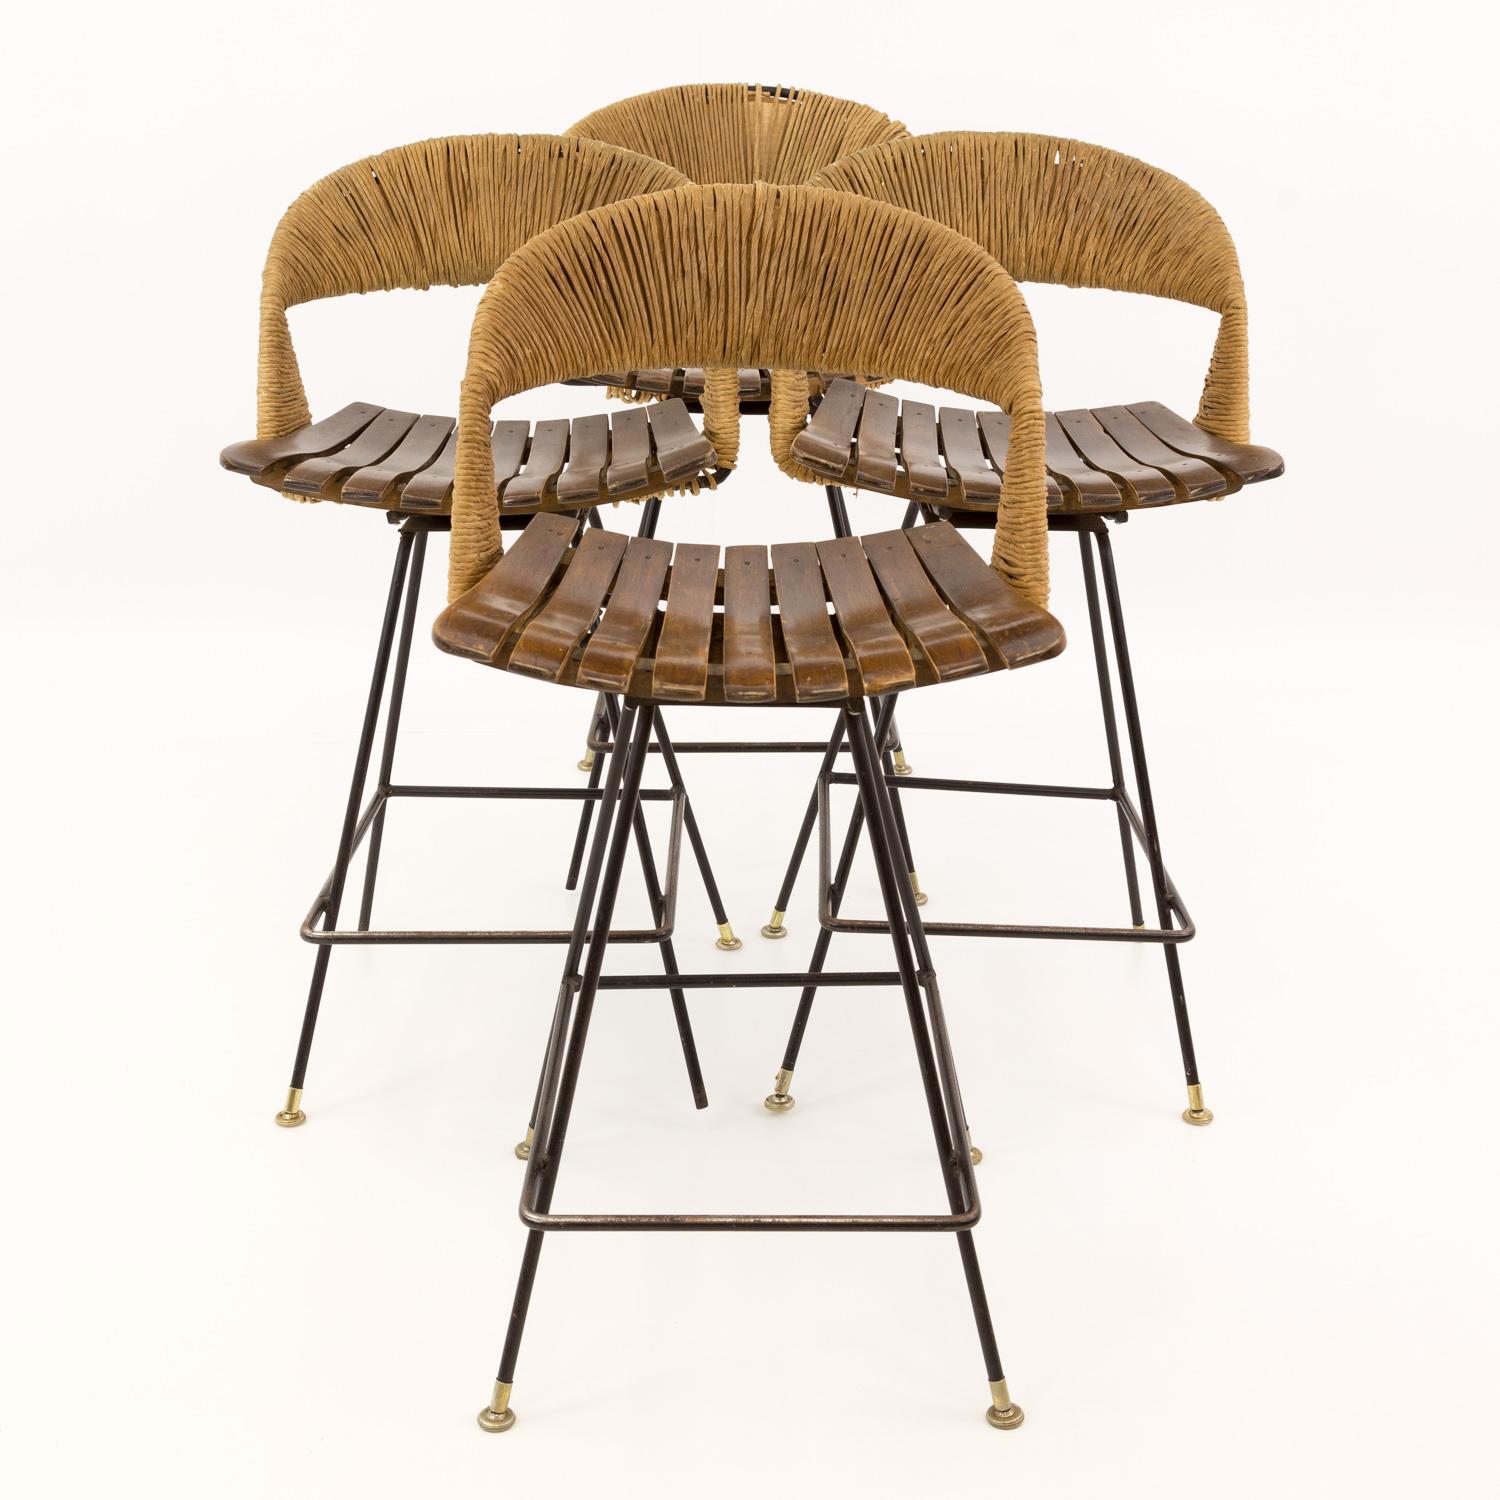 Arthur Umanoff Mid Century Tiki iron bar stools - Set of 4
Each stool is 18.5 wide x 20 deep x 35 high with a seat height of 25 inches

All pieces of furniture can be had in what we call restored vintage condition. This means the piece is restored